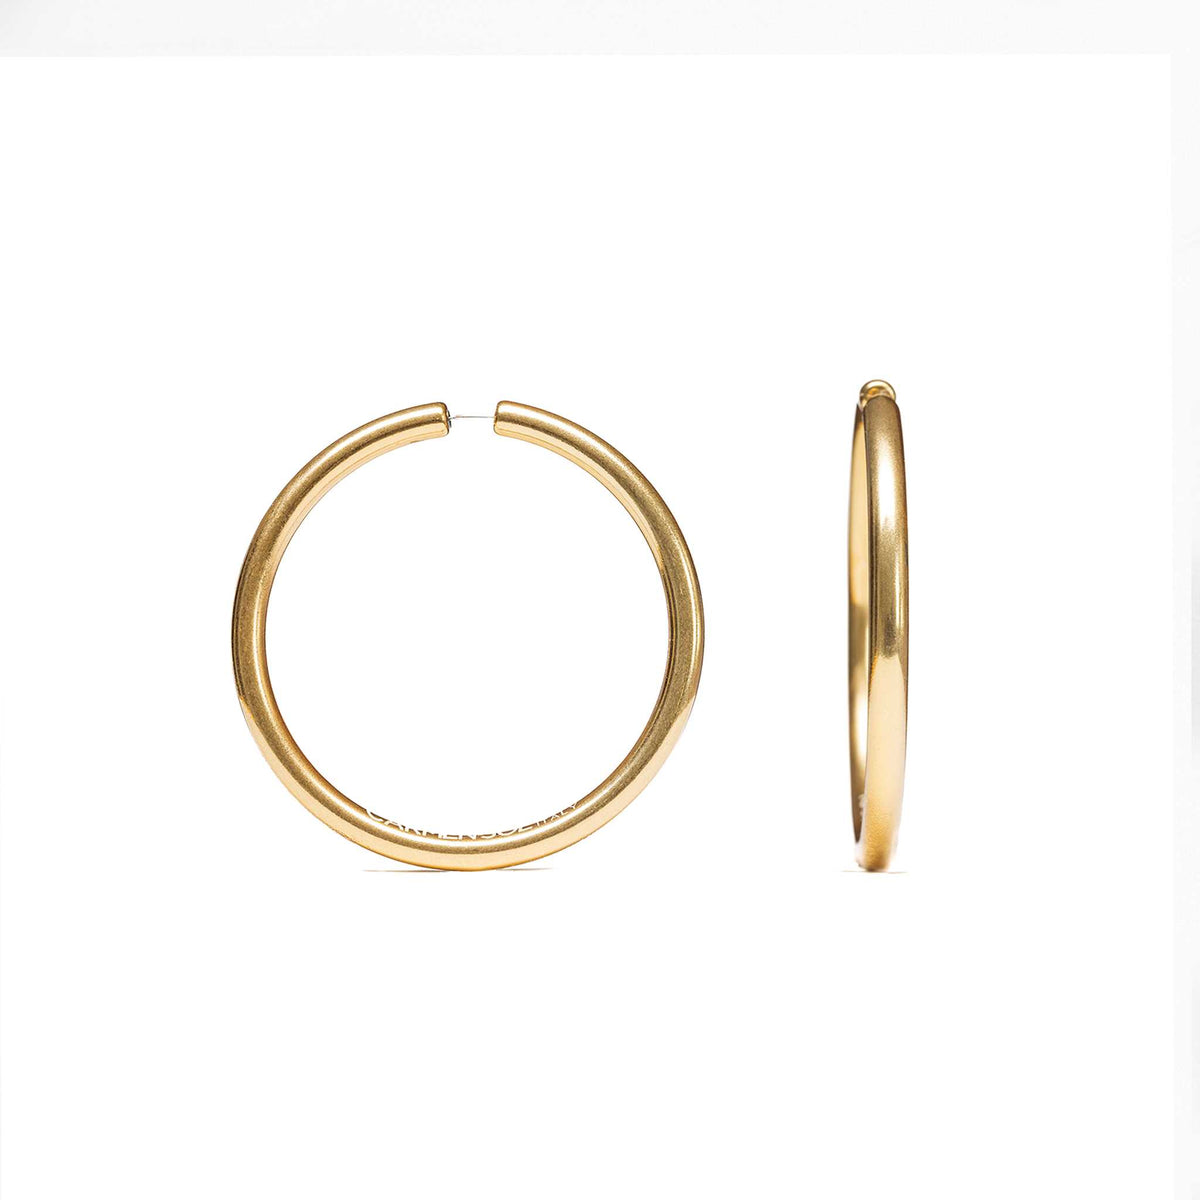 Gold hoop earrings Adorn yourself with golden circles ffrom Carmen Sol earrings for women